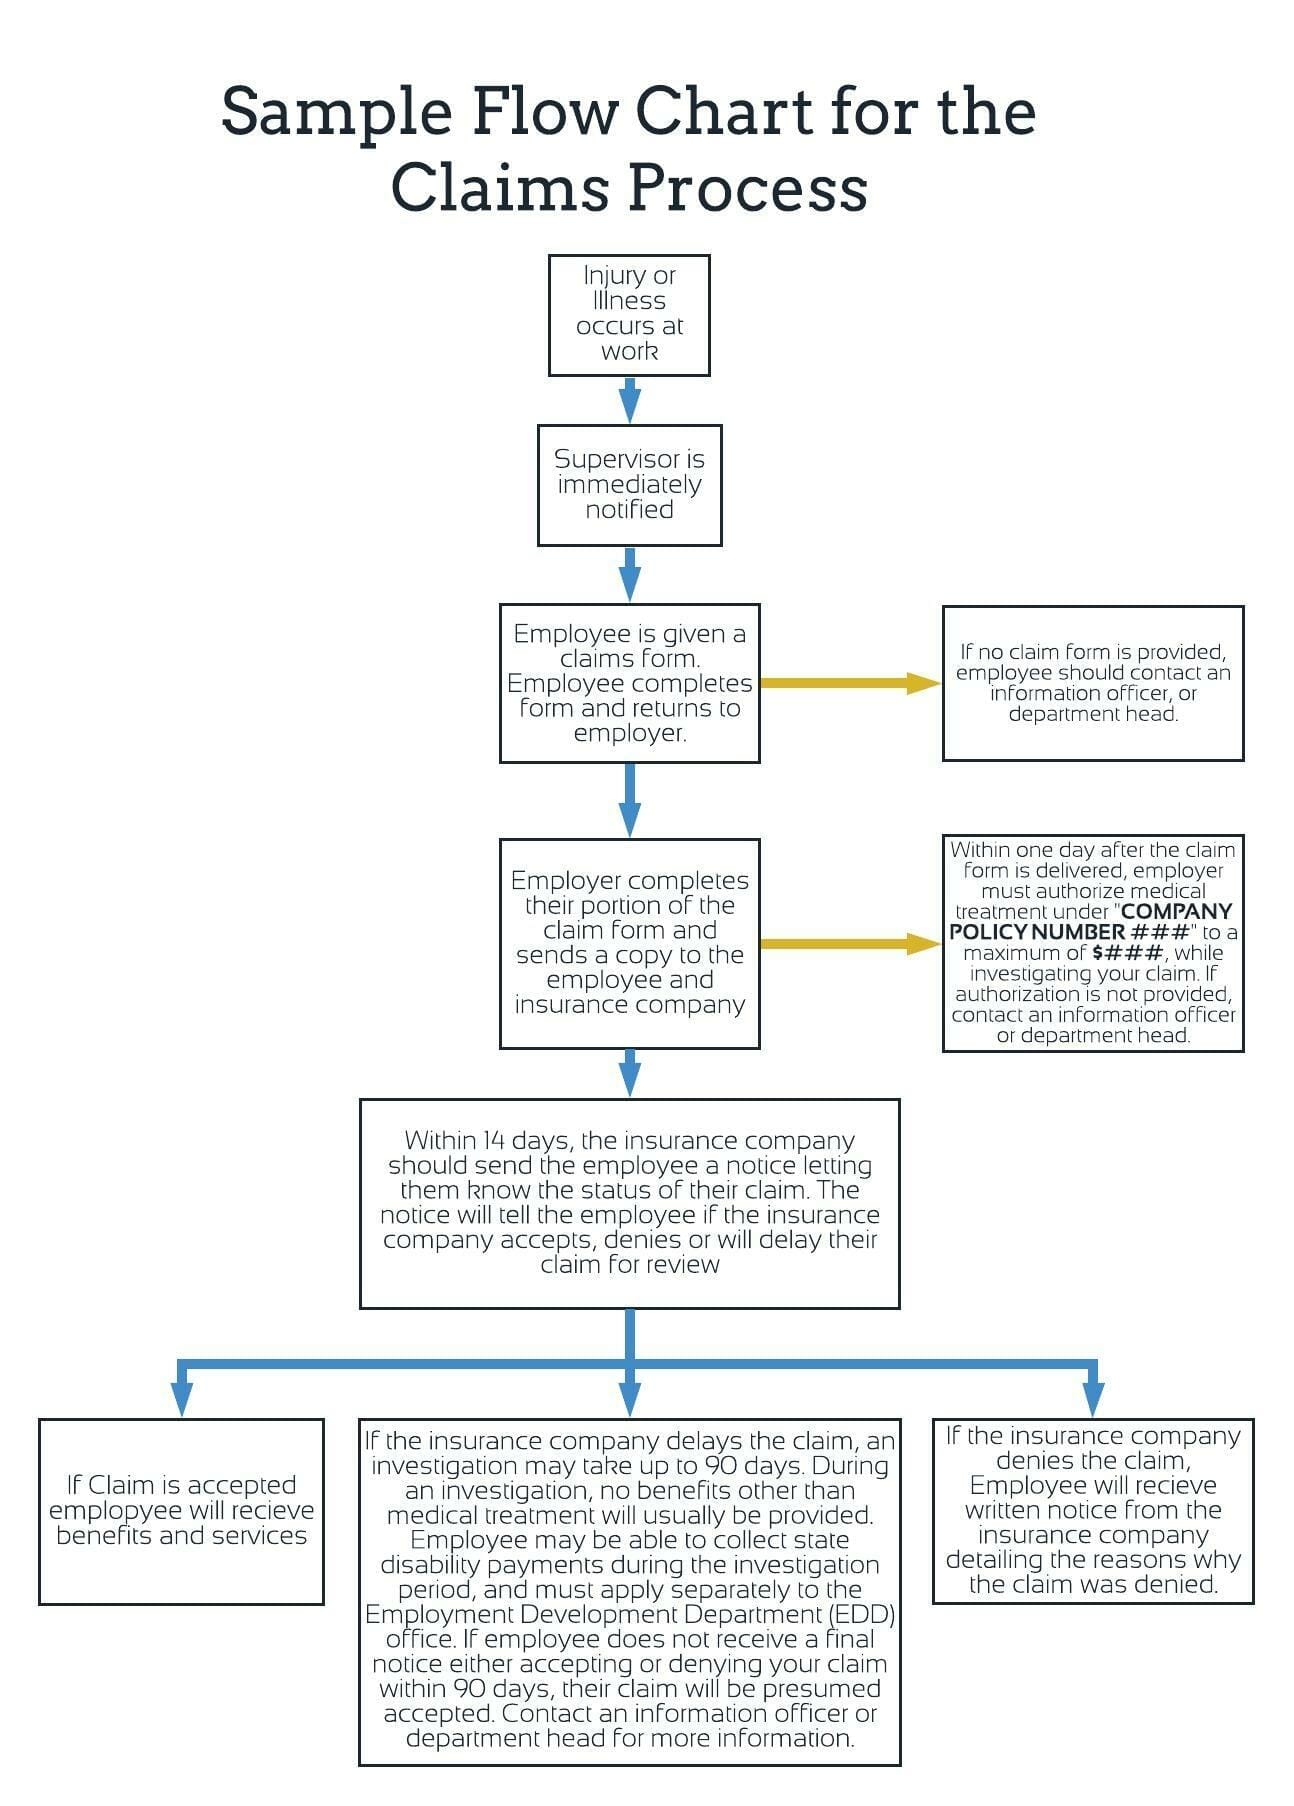 Sample Claims Process Flow Chart